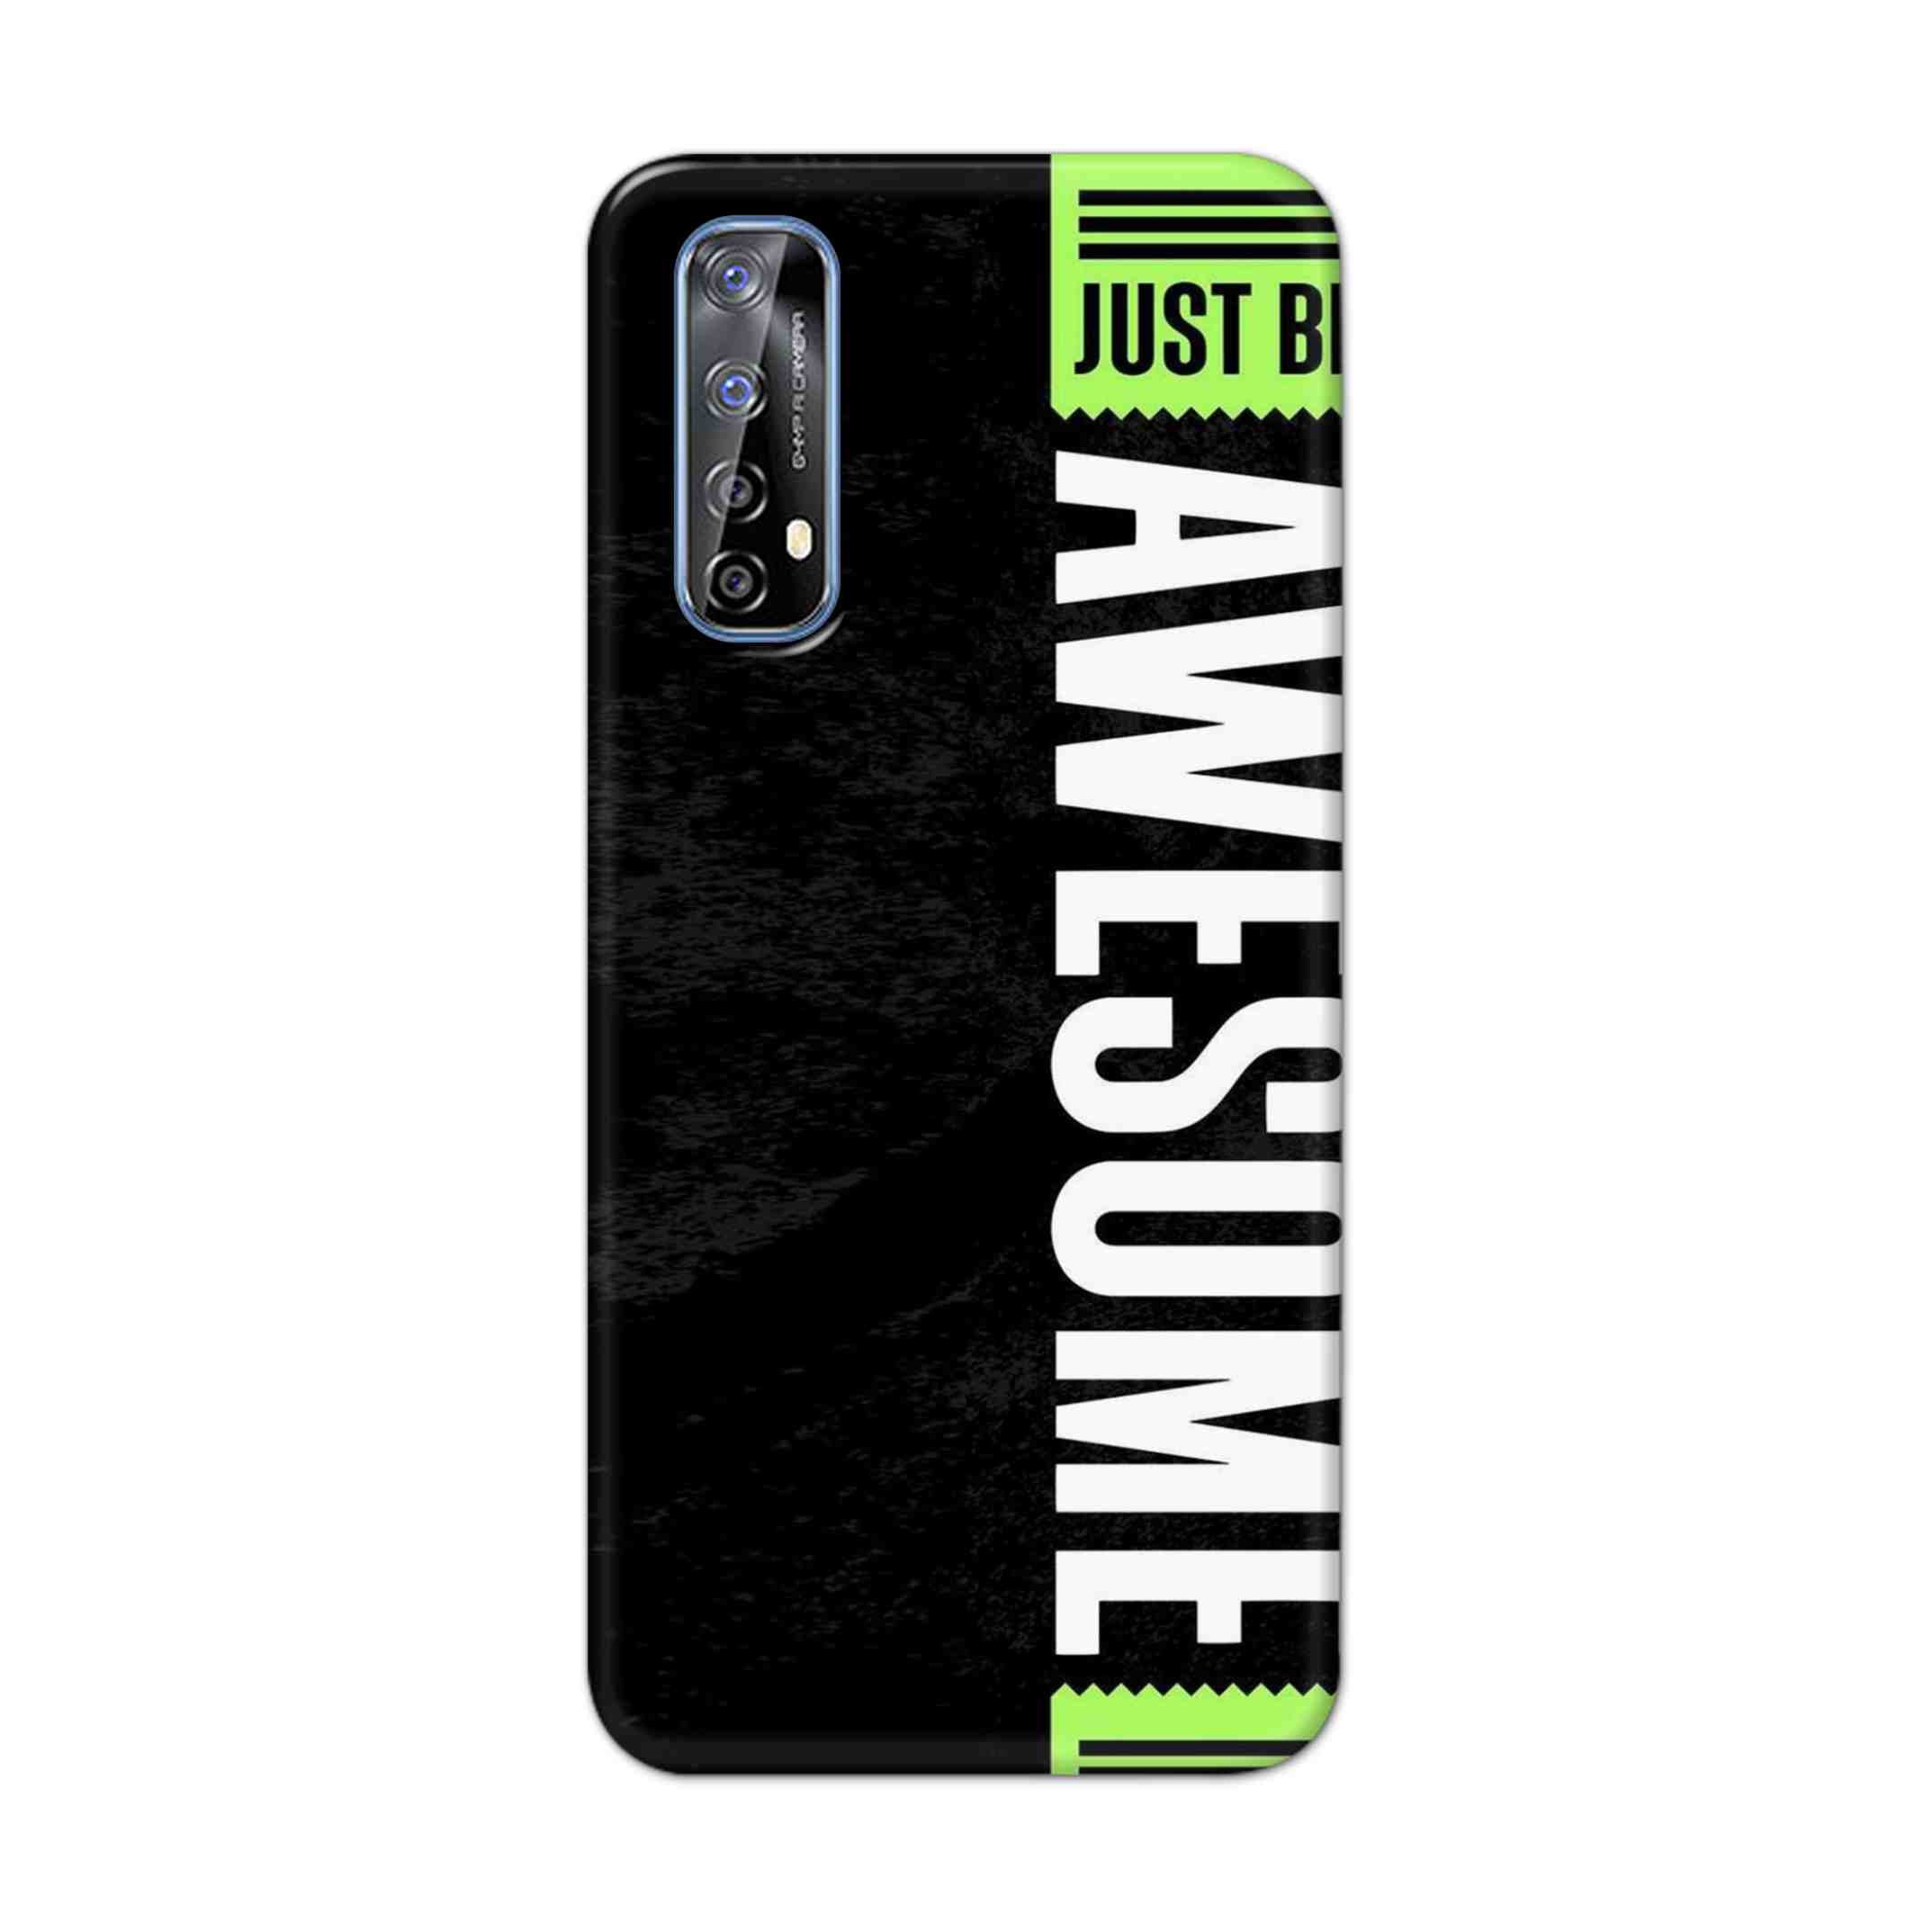 Buy Awesome Street Hard Back Mobile Phone Case Cover For Realme 7 Online